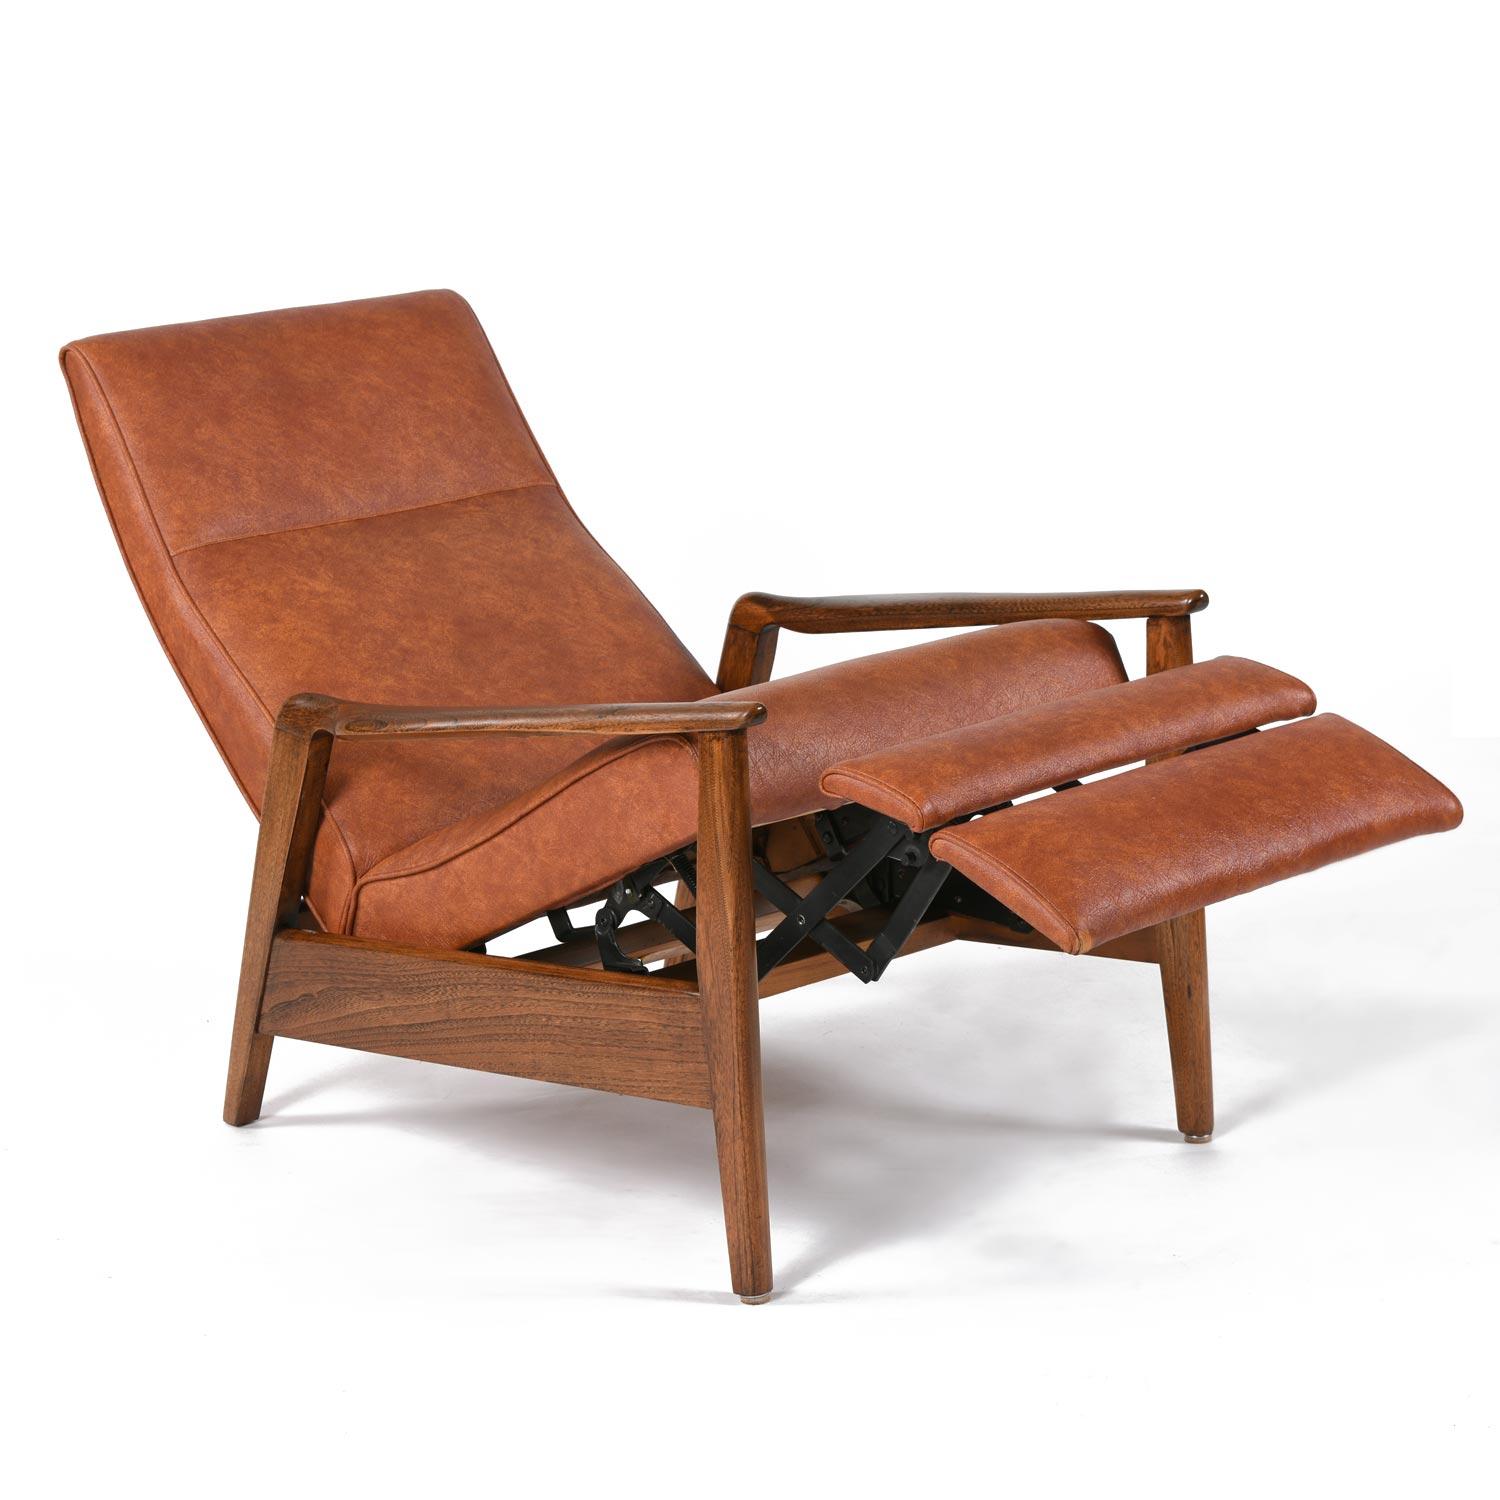 Super stylish Mid-Century Modern recliner by Home Chair Co. of Ronda, North Carolina. The Milo Baughman style recliner has a blade-like back and solid oak frame. Durability and beauty were hallmarks of American 20th Century design. While the Danish